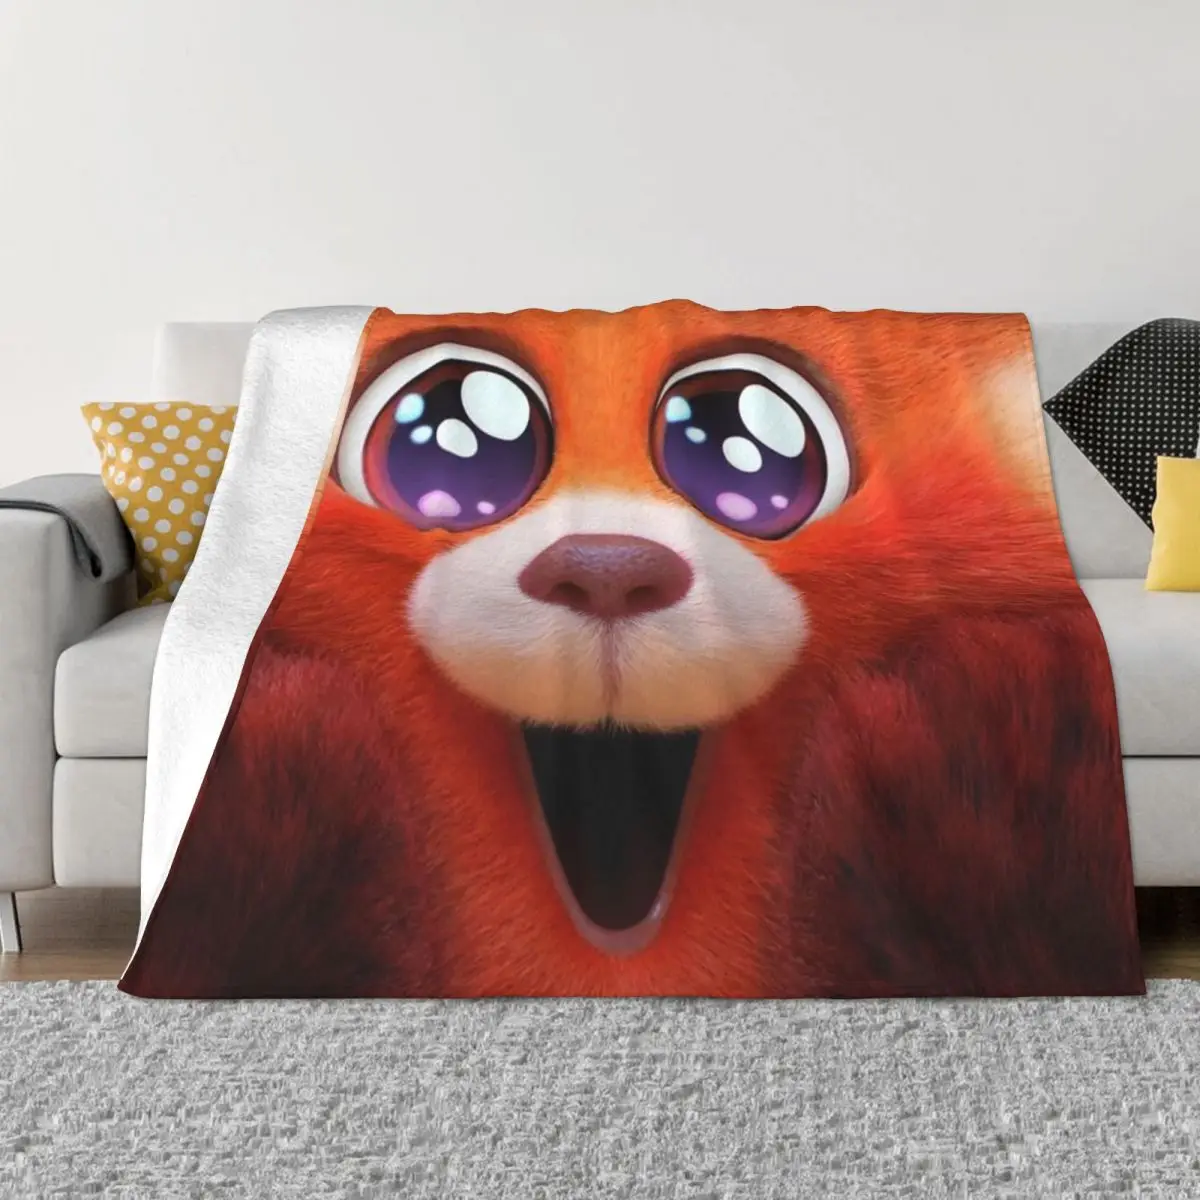 

Turning Red Cute Cartoon Panda Blankets Fleece Spring Autumn Anime Film Portable Soft Throw Blankets for Bedding Couch Quilt